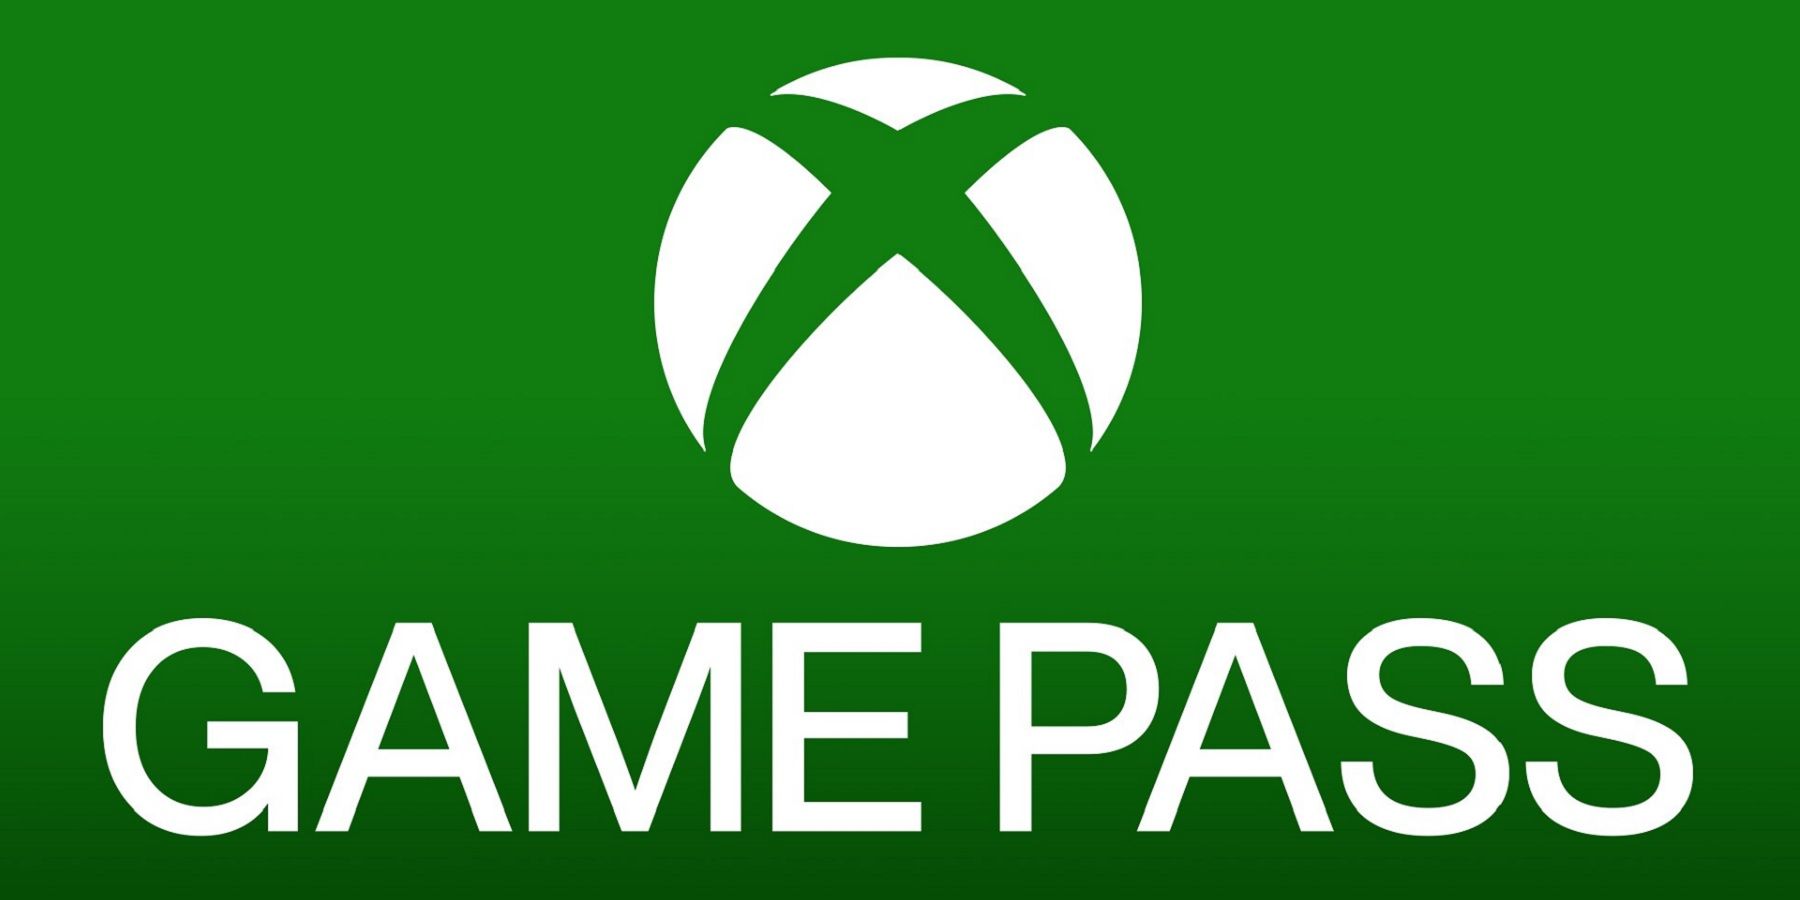 Xbox Game Pass Adds 2 Games Today, Including Day One Release